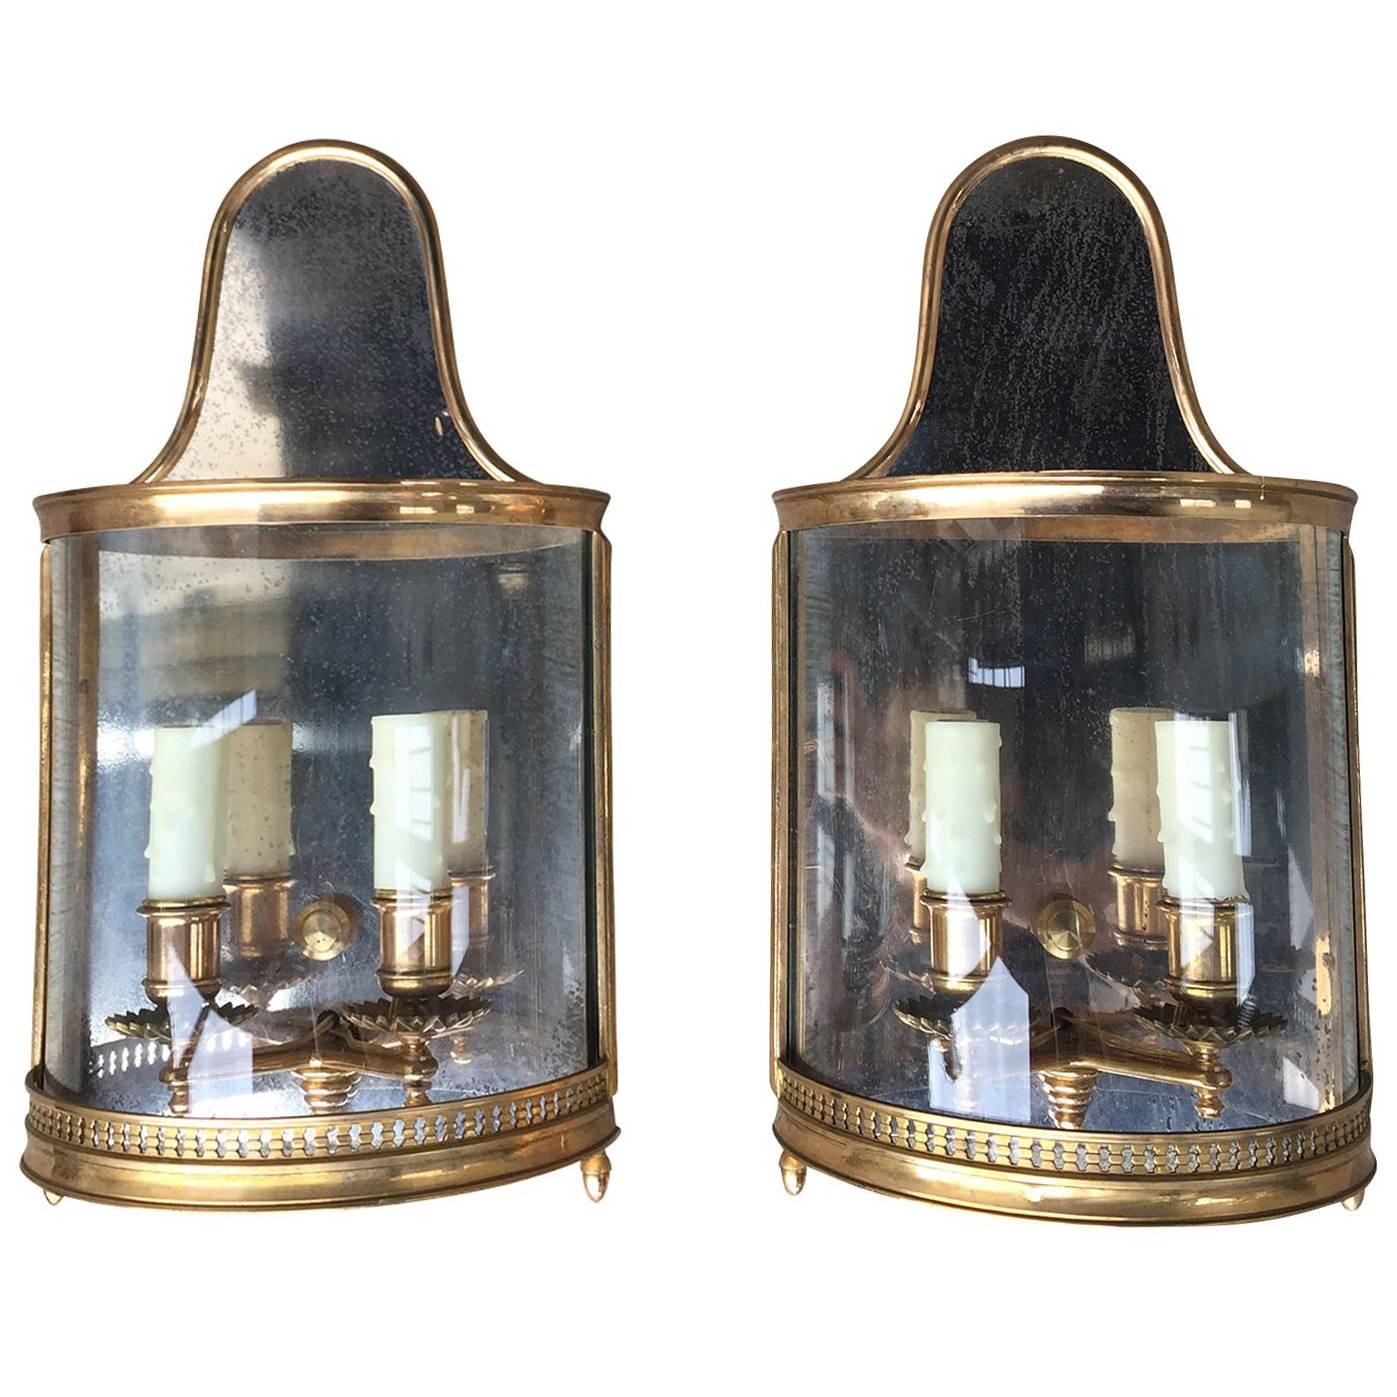 Pair of 20th Century Gilt Bronze Regency Style Sconces, Mirrored Back